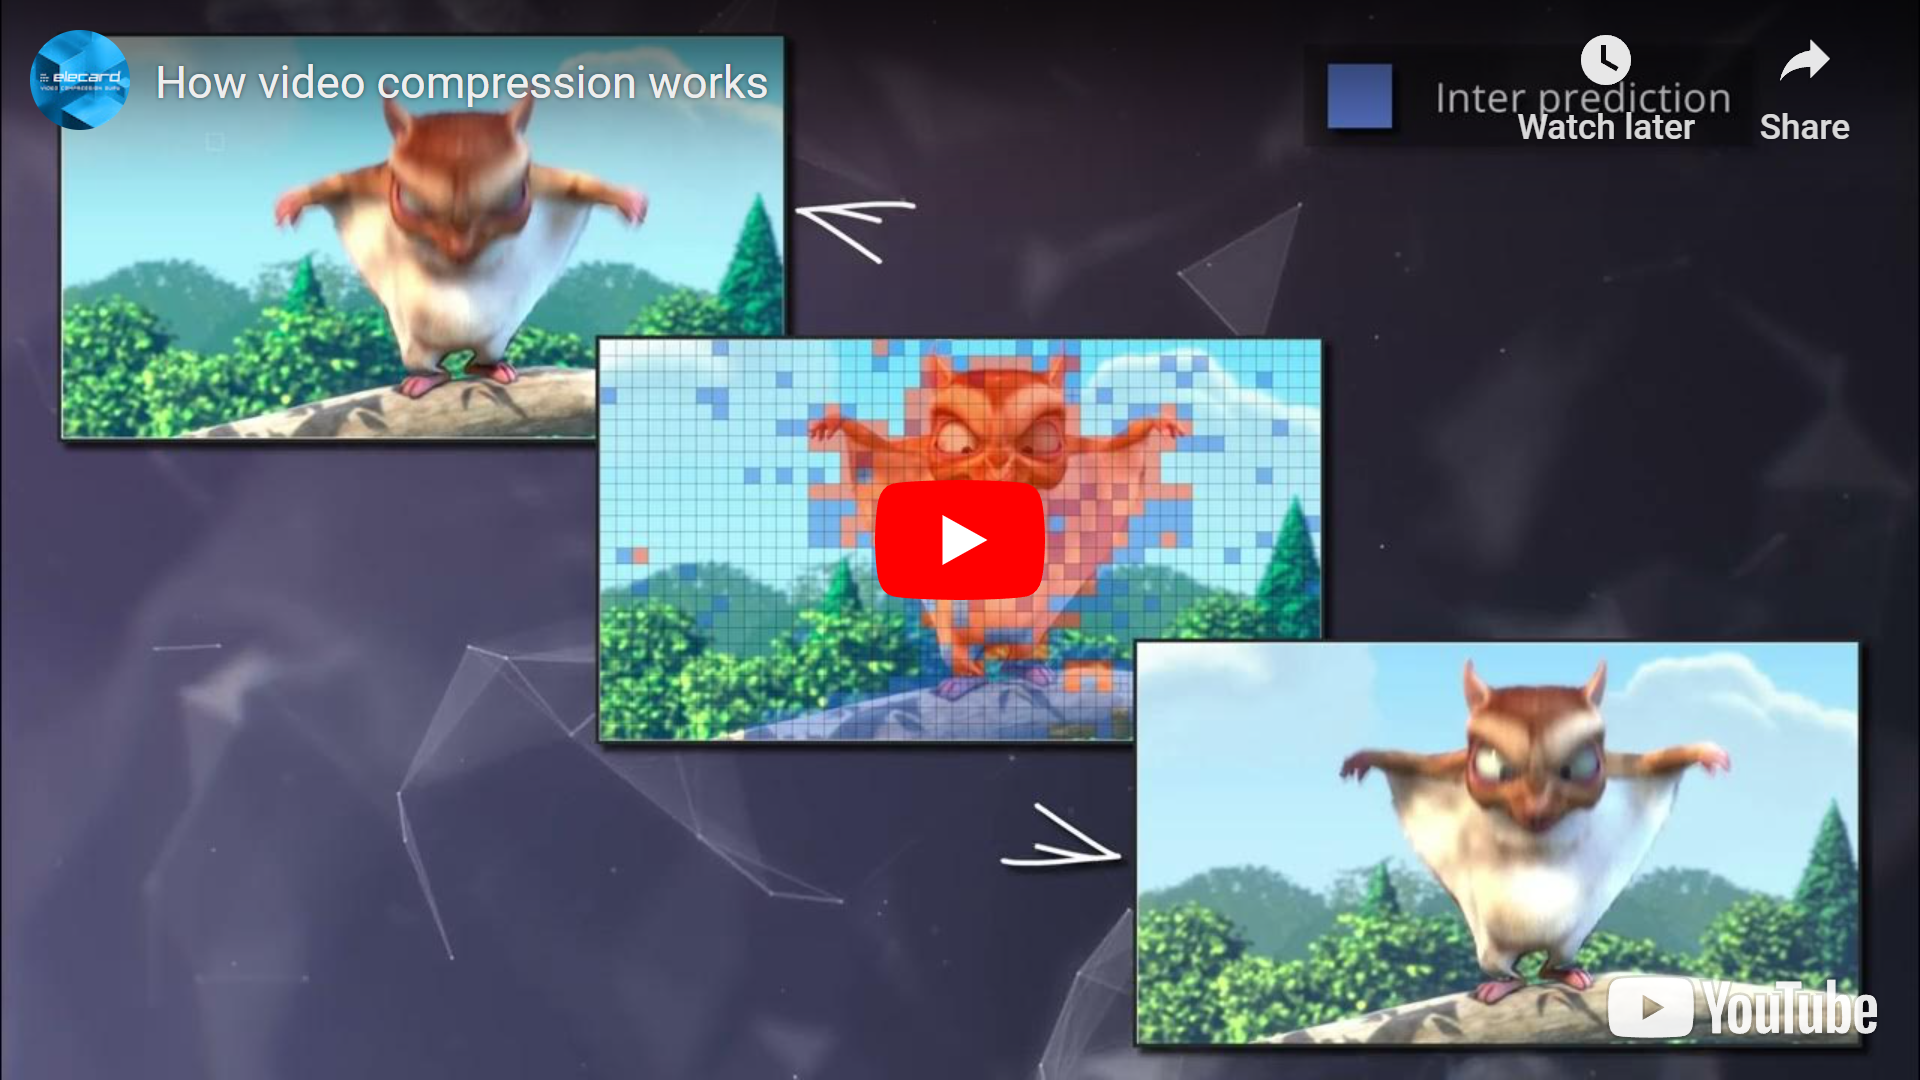 How video compression works